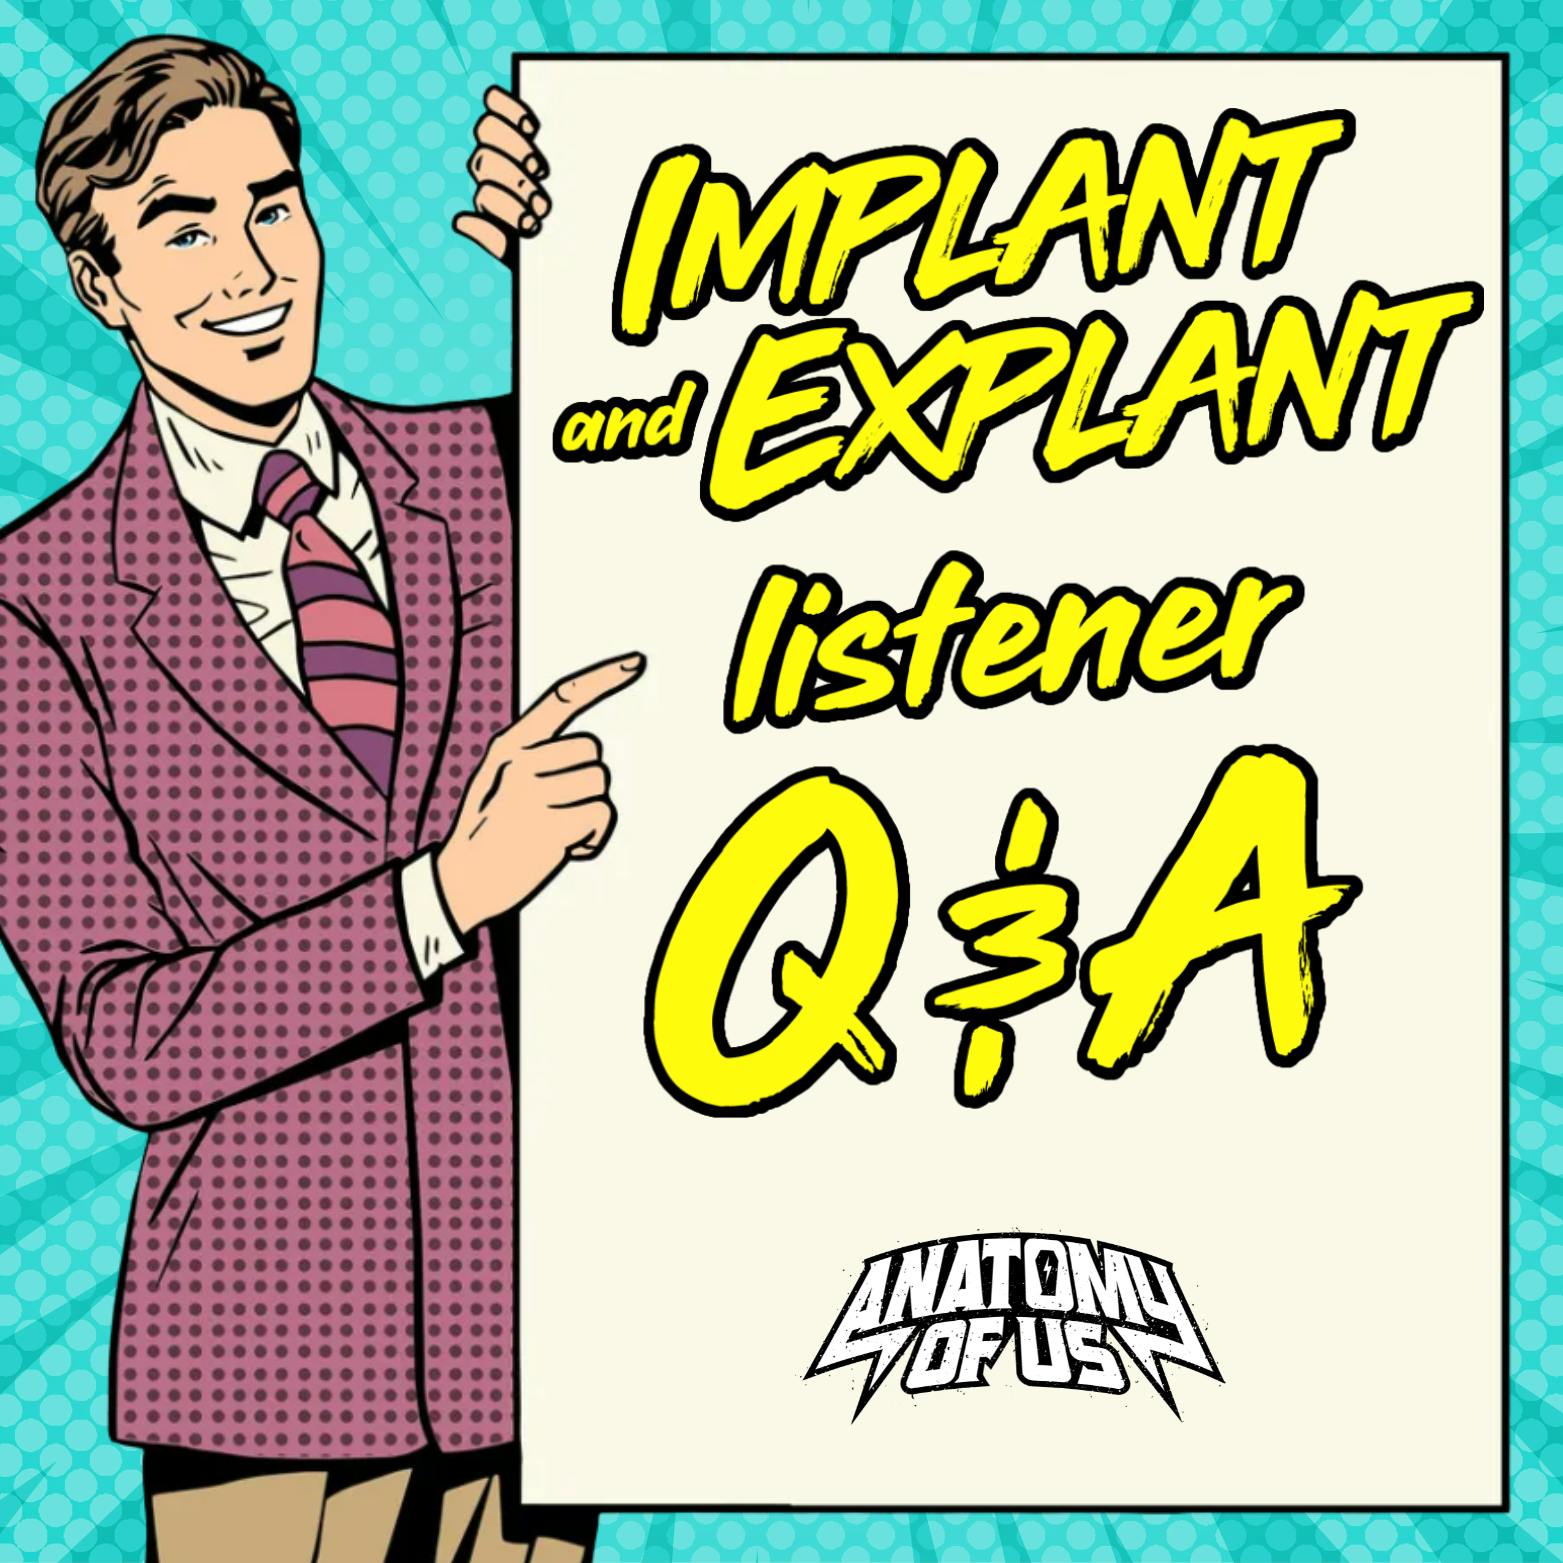 Implant and Explant Listener Q&A